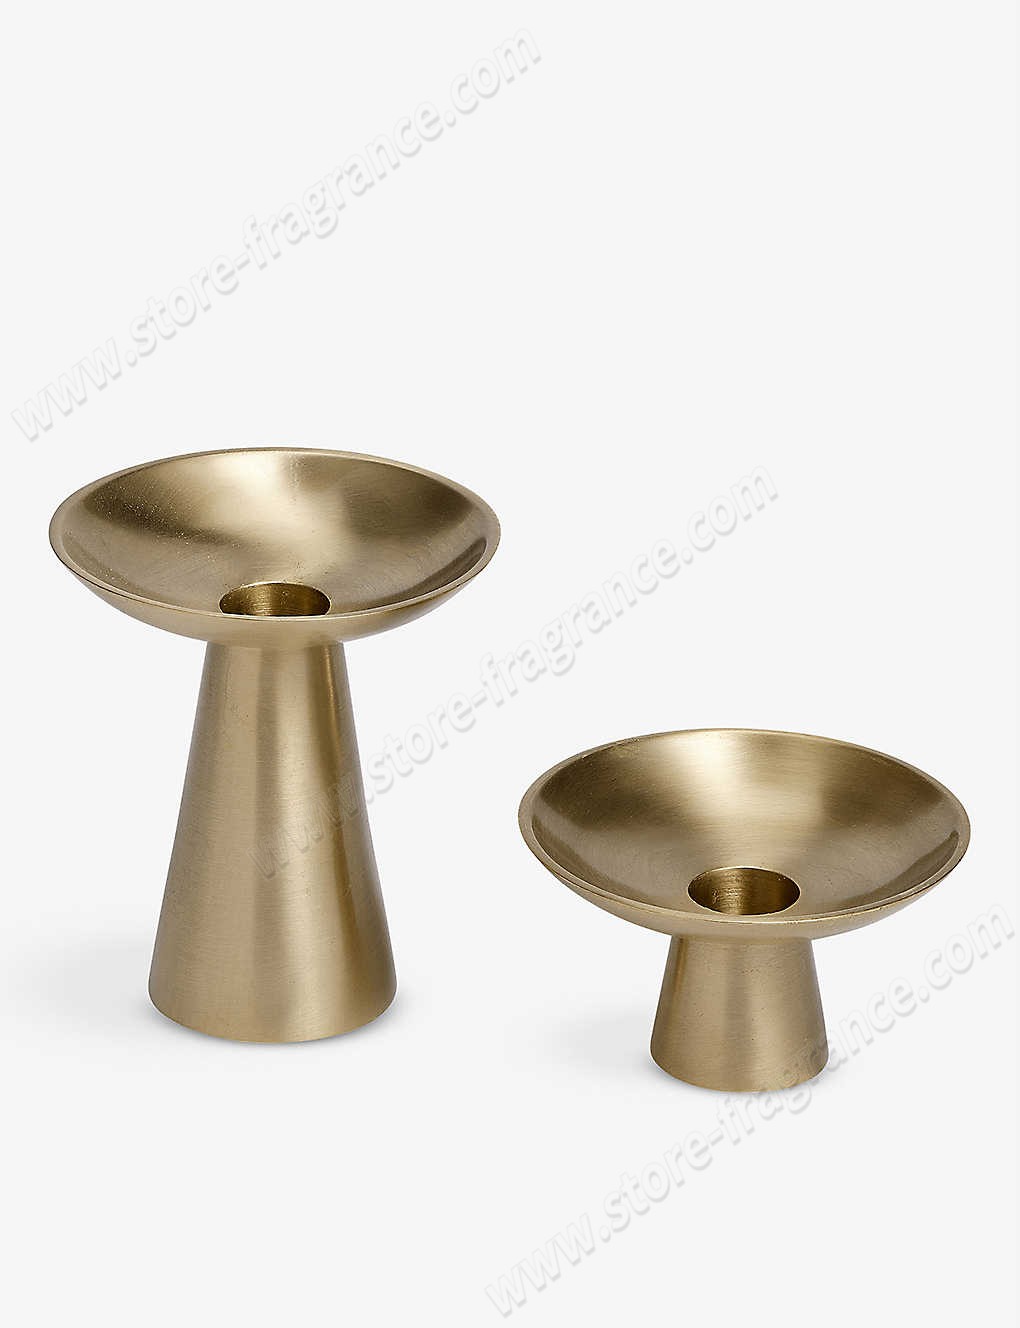 SOHO HOME/Marlton brushed brass candle holders set of two Limit Offer - -0